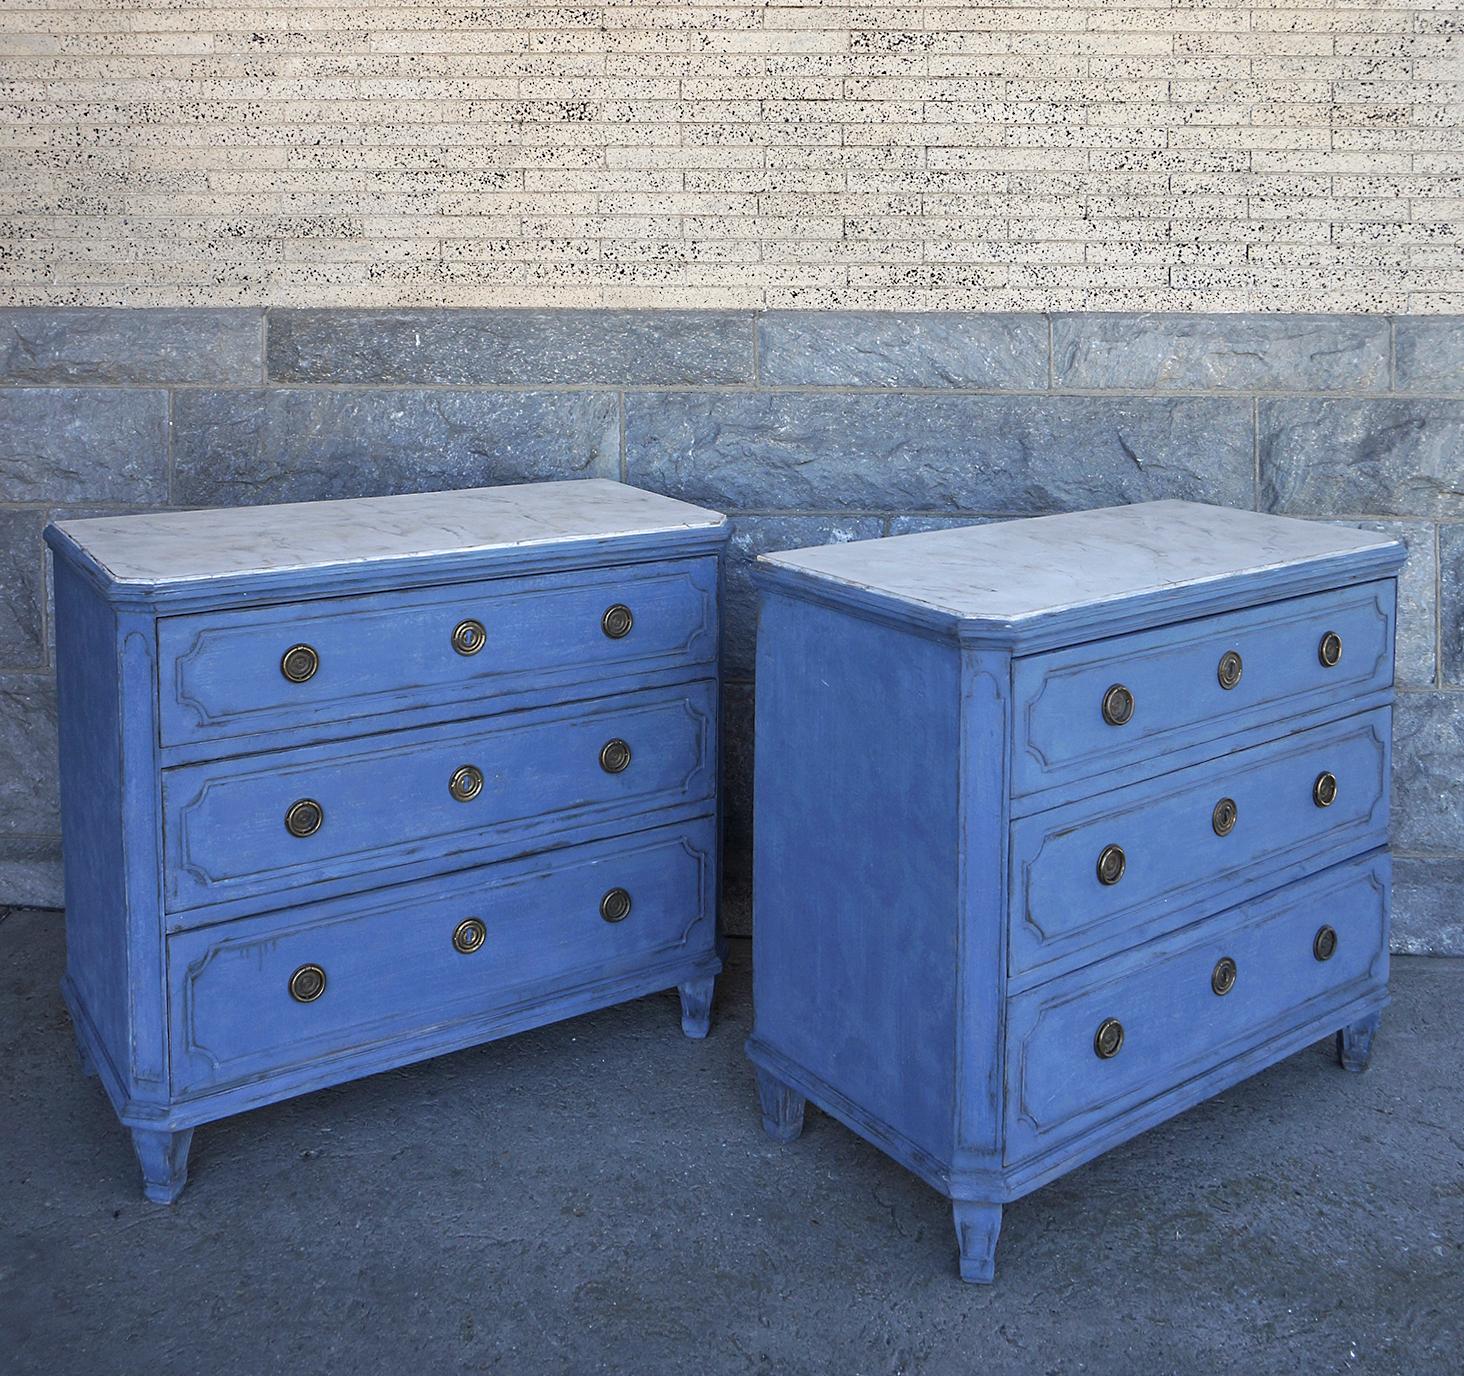 Pair of Swedish chests of drawers, circa 1860, having shaped and marbleized tops over three graduated drawers in a case with canted corners with raised detail. The drawer fronts have incised rectangles and brass hardware. The feet have been replaced.